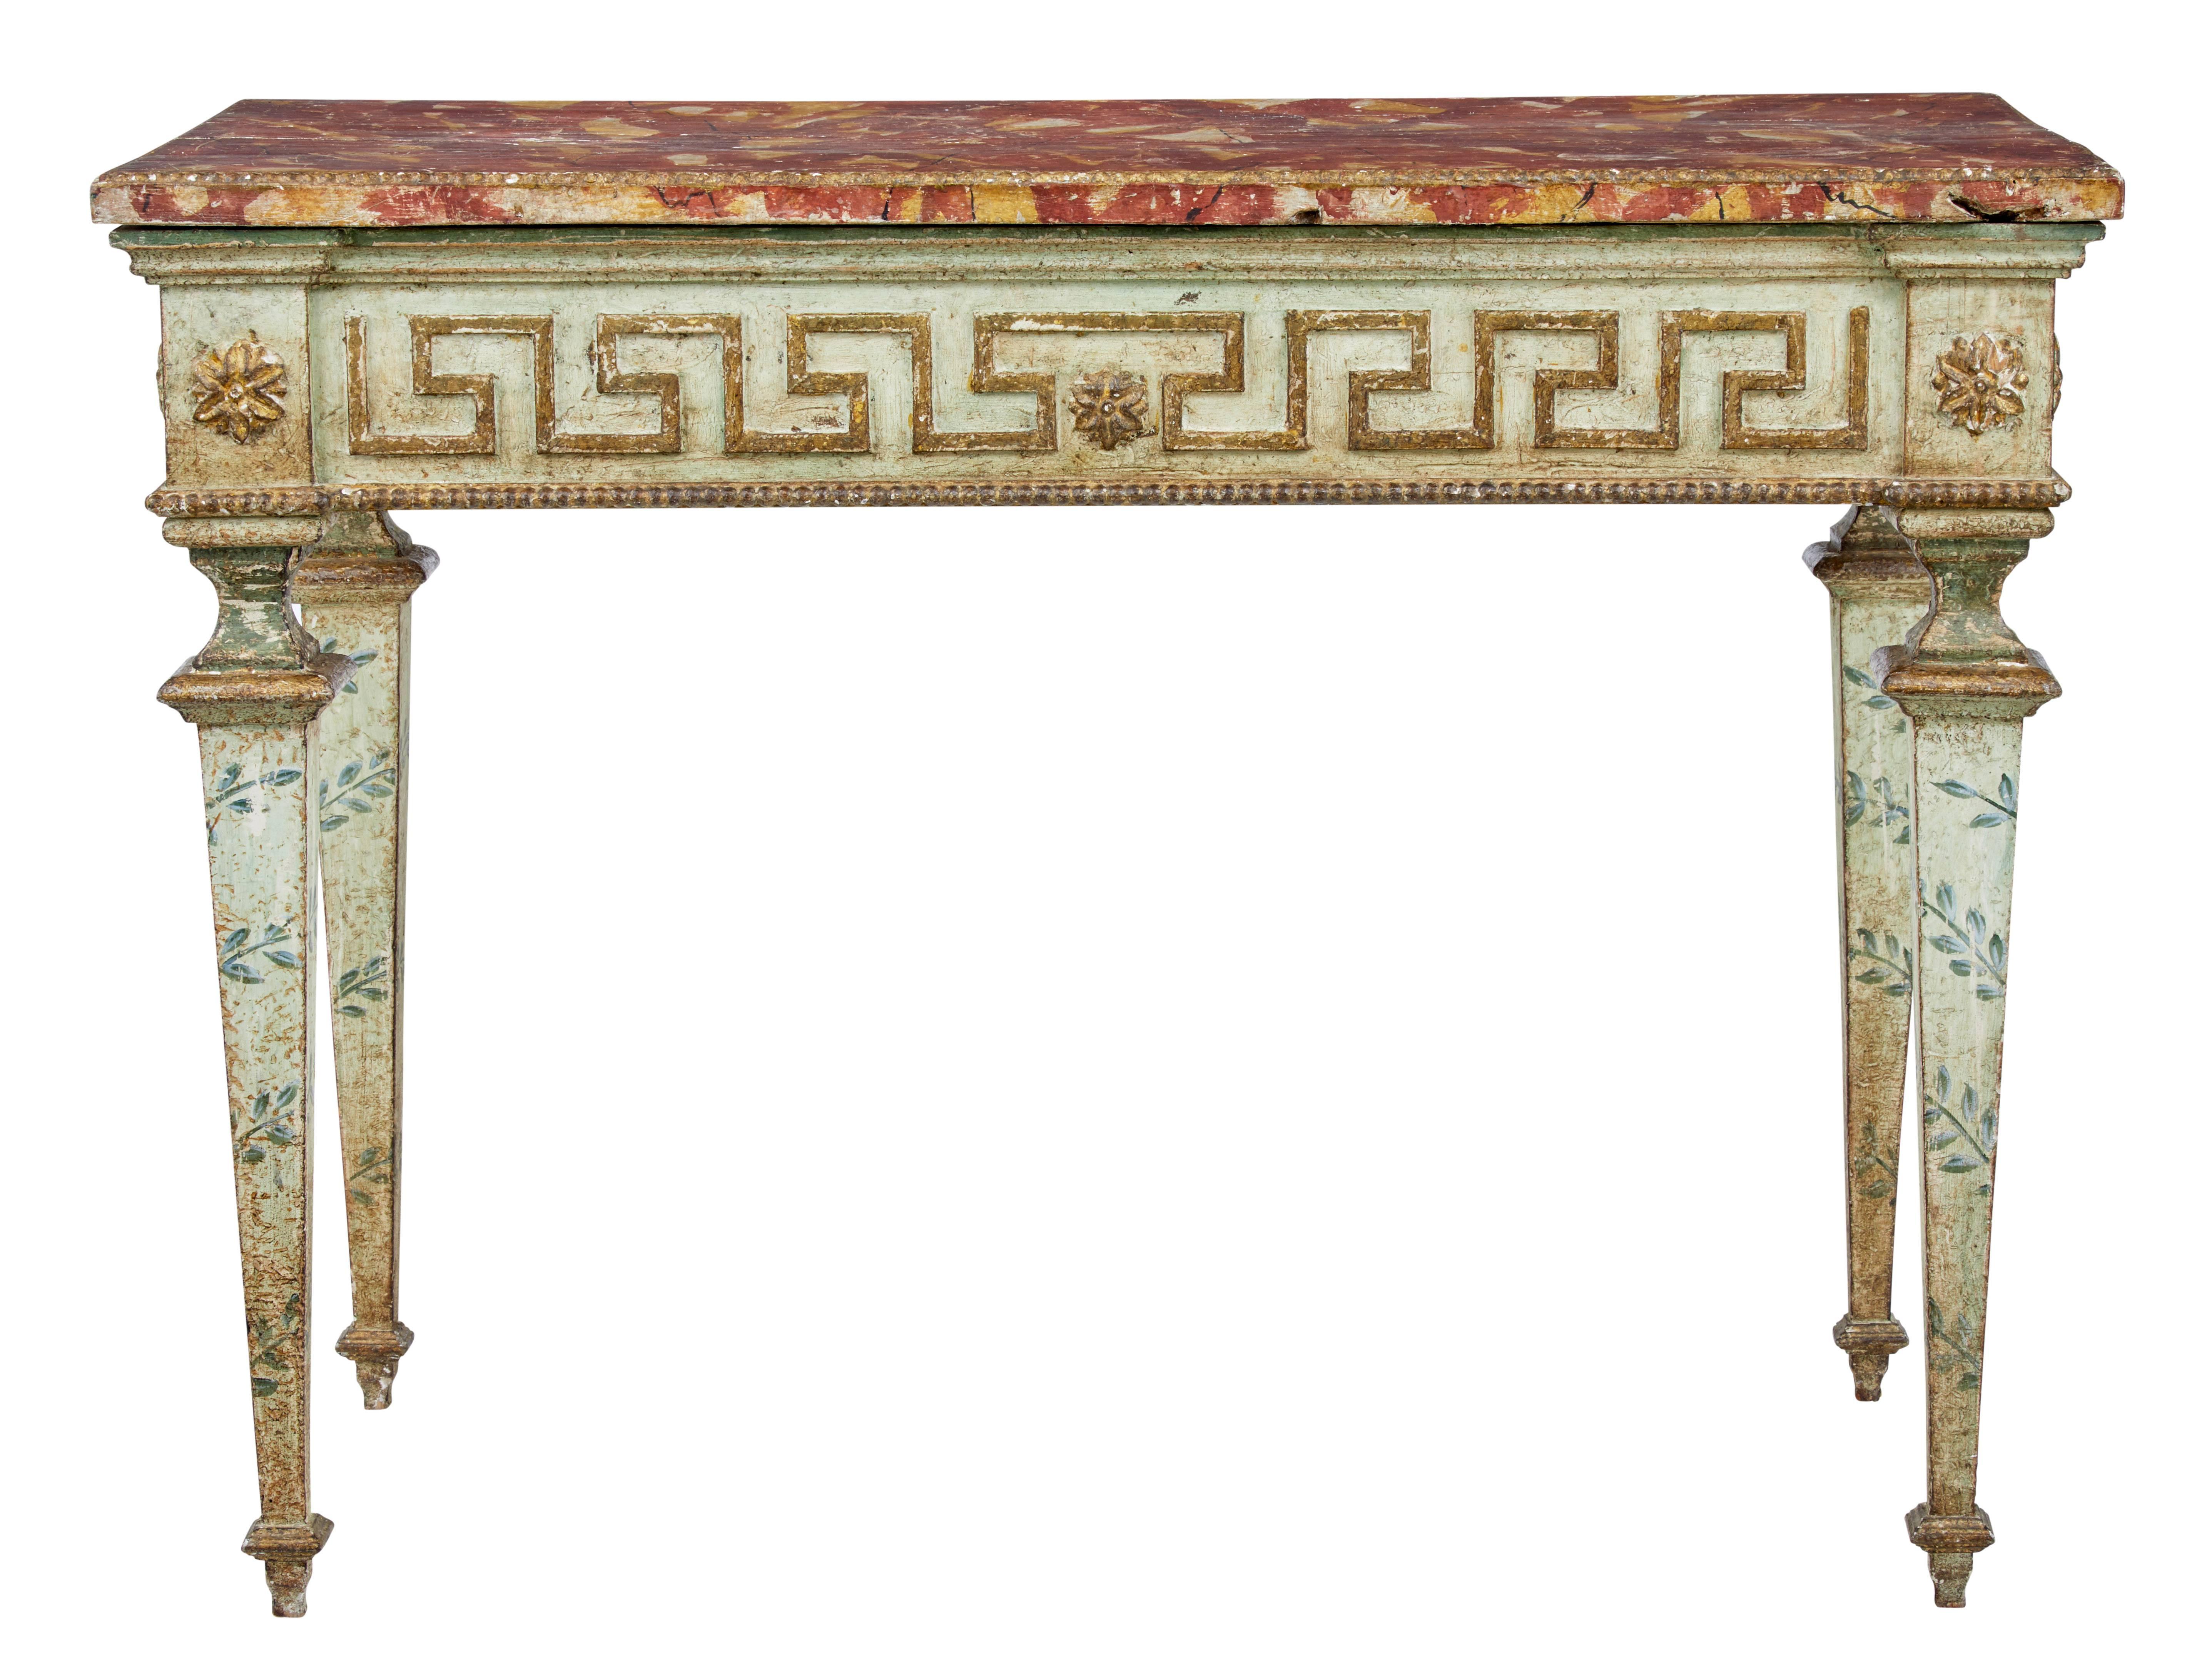 We are pleased to offer this stunning pair of Tuscan Italian console tables, circa 1880.

Faux marble painted top to simulate sienna marble with gilt beaded edge.

Gilt Greek key design to the frieze with applied rosettes. Each table standing on